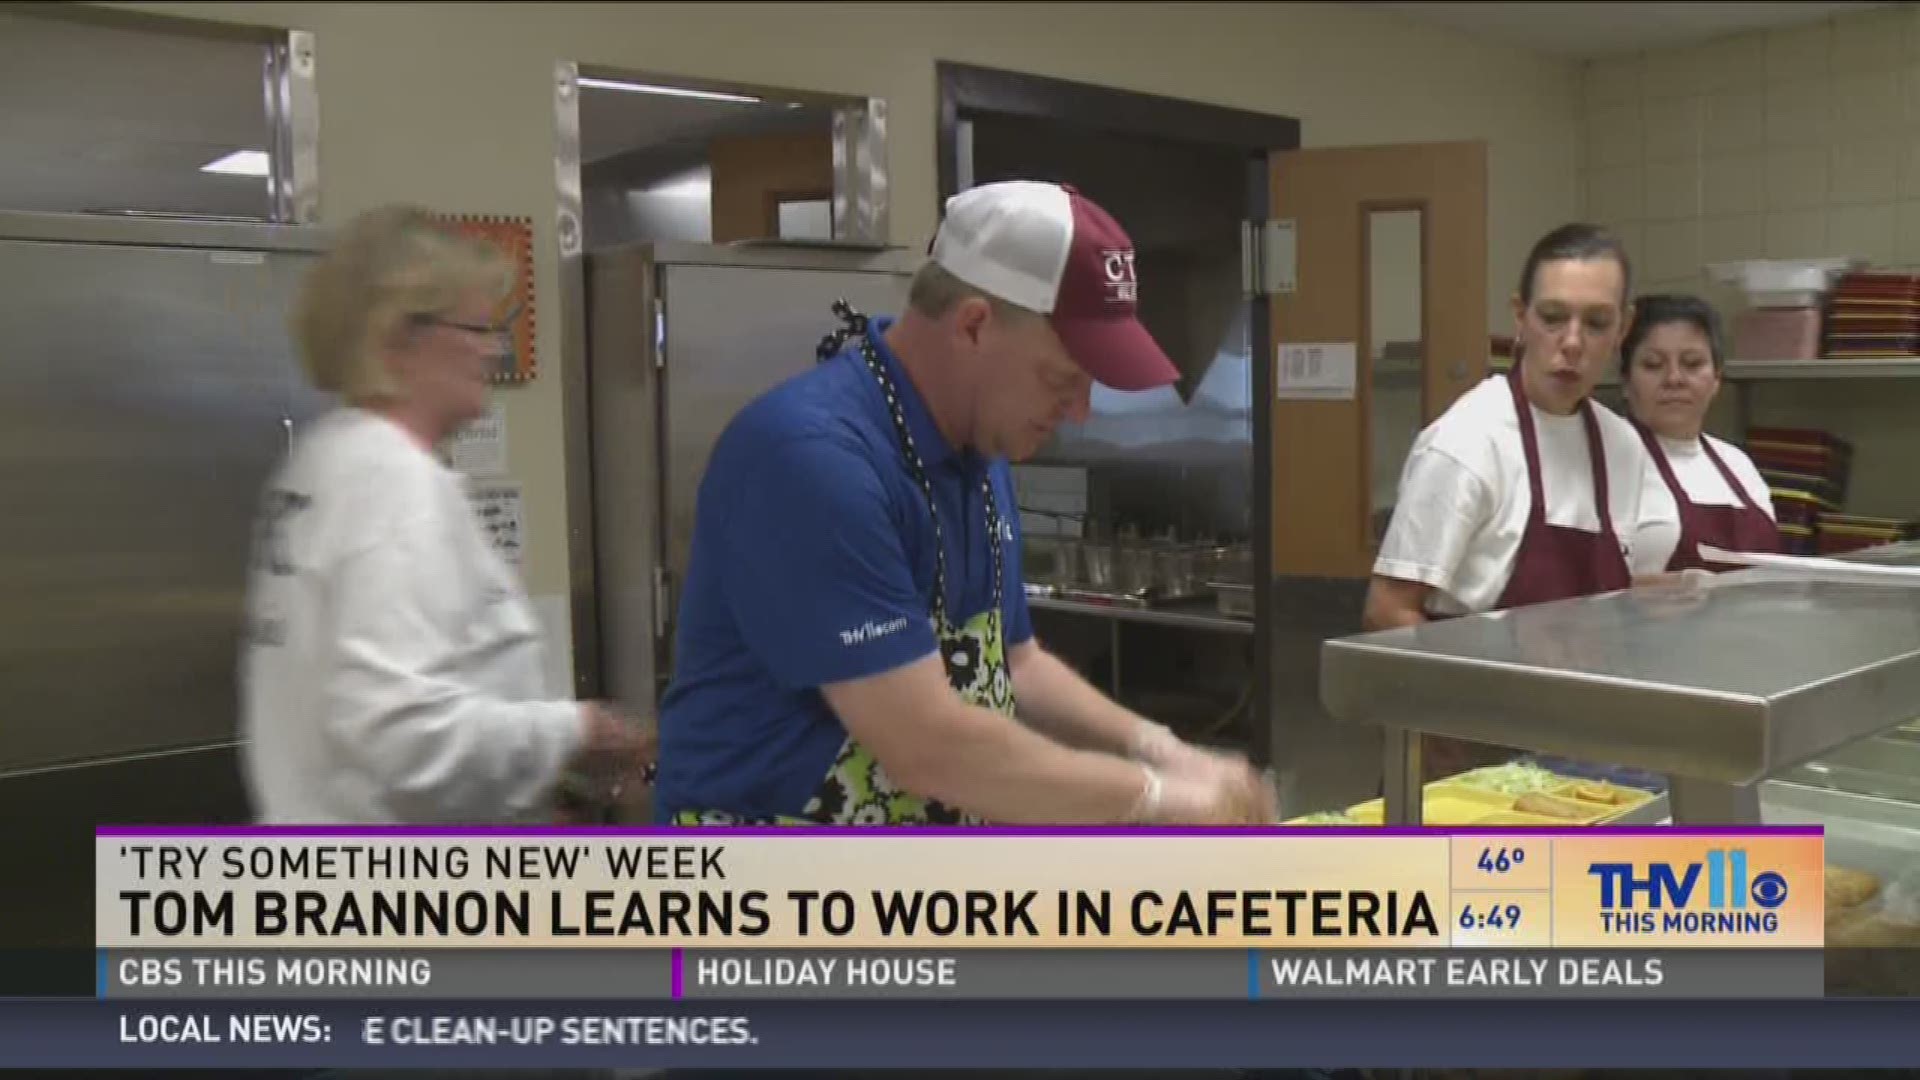 Here's what happened when Tom Brannon tried his hand at preparing lunch for students at Christ the King.